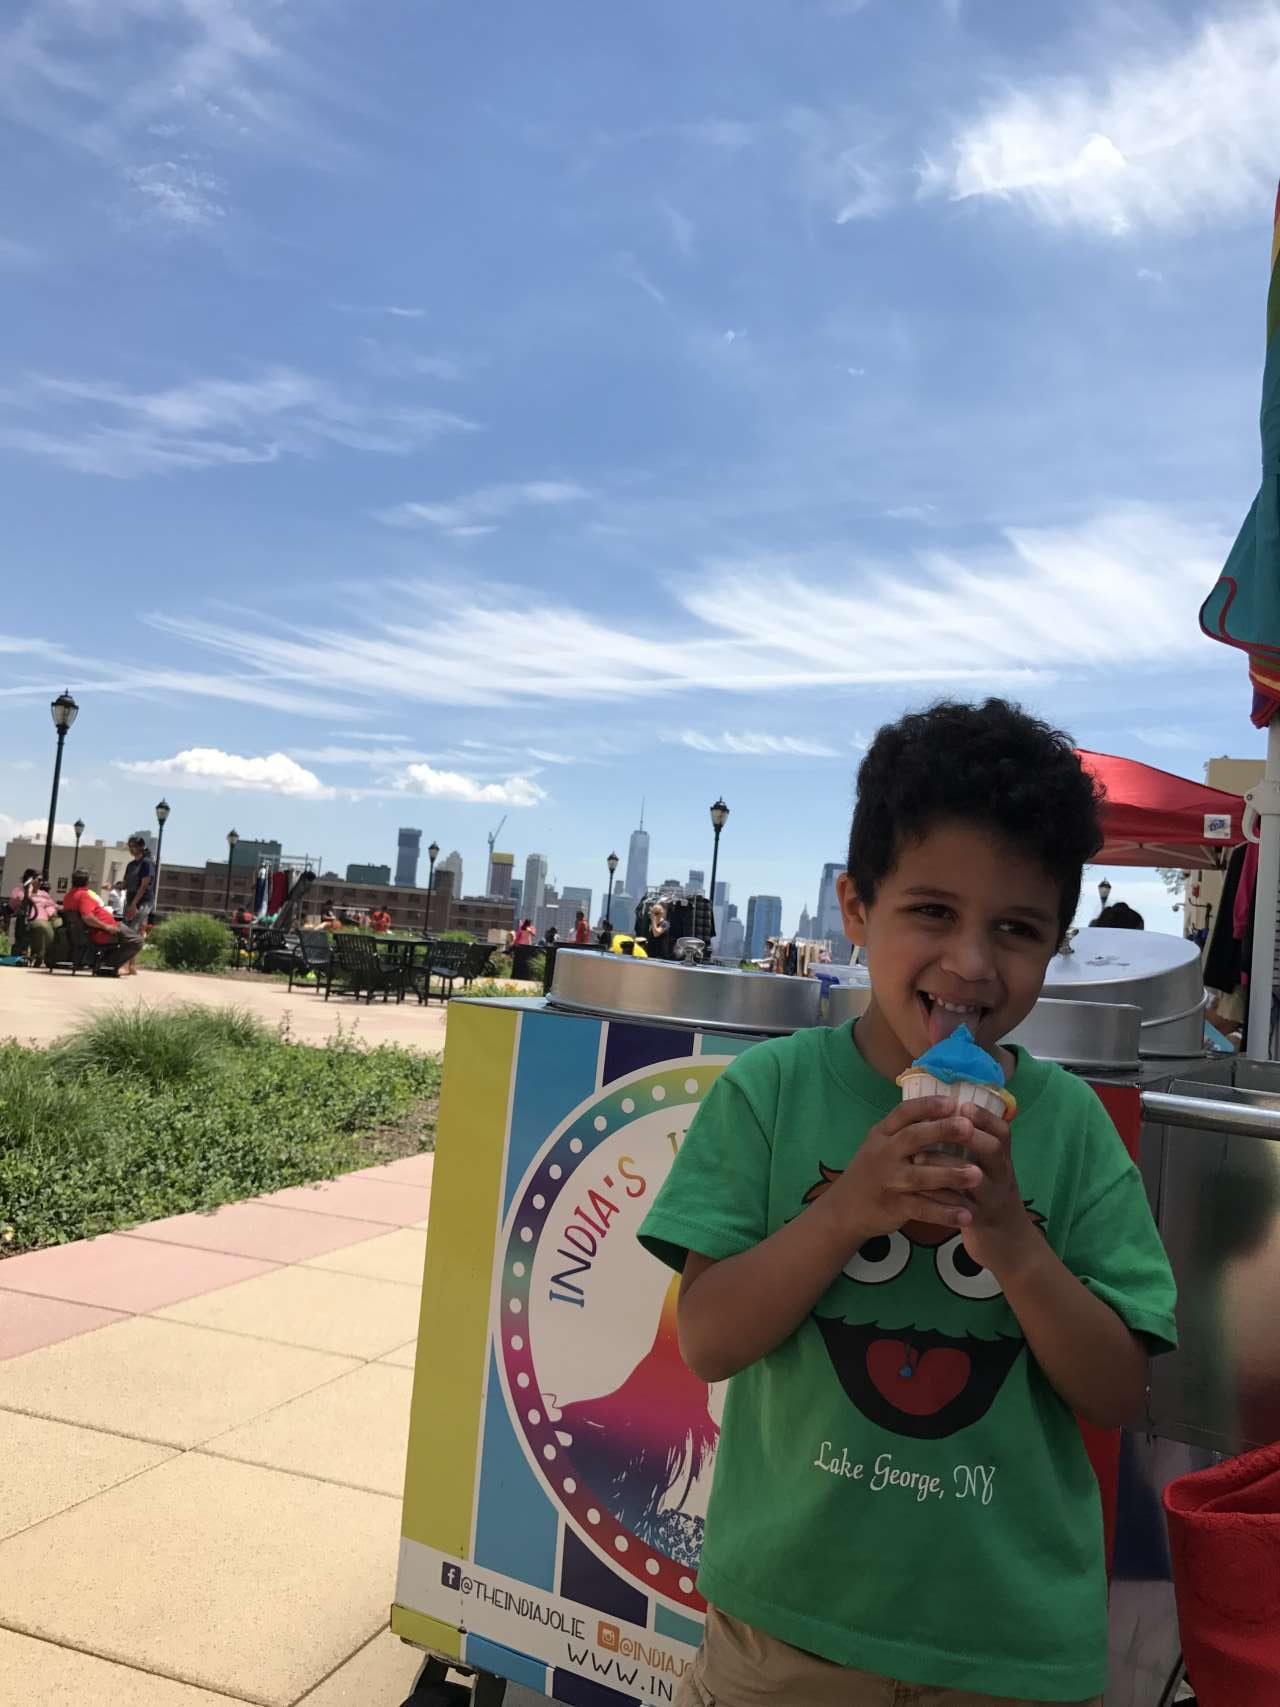 Litle boy with oscar the ground tshirt standing in front of India's Italian Ice cart smiling holidng a blue Italian Ice in his hand with views of NYC in the background